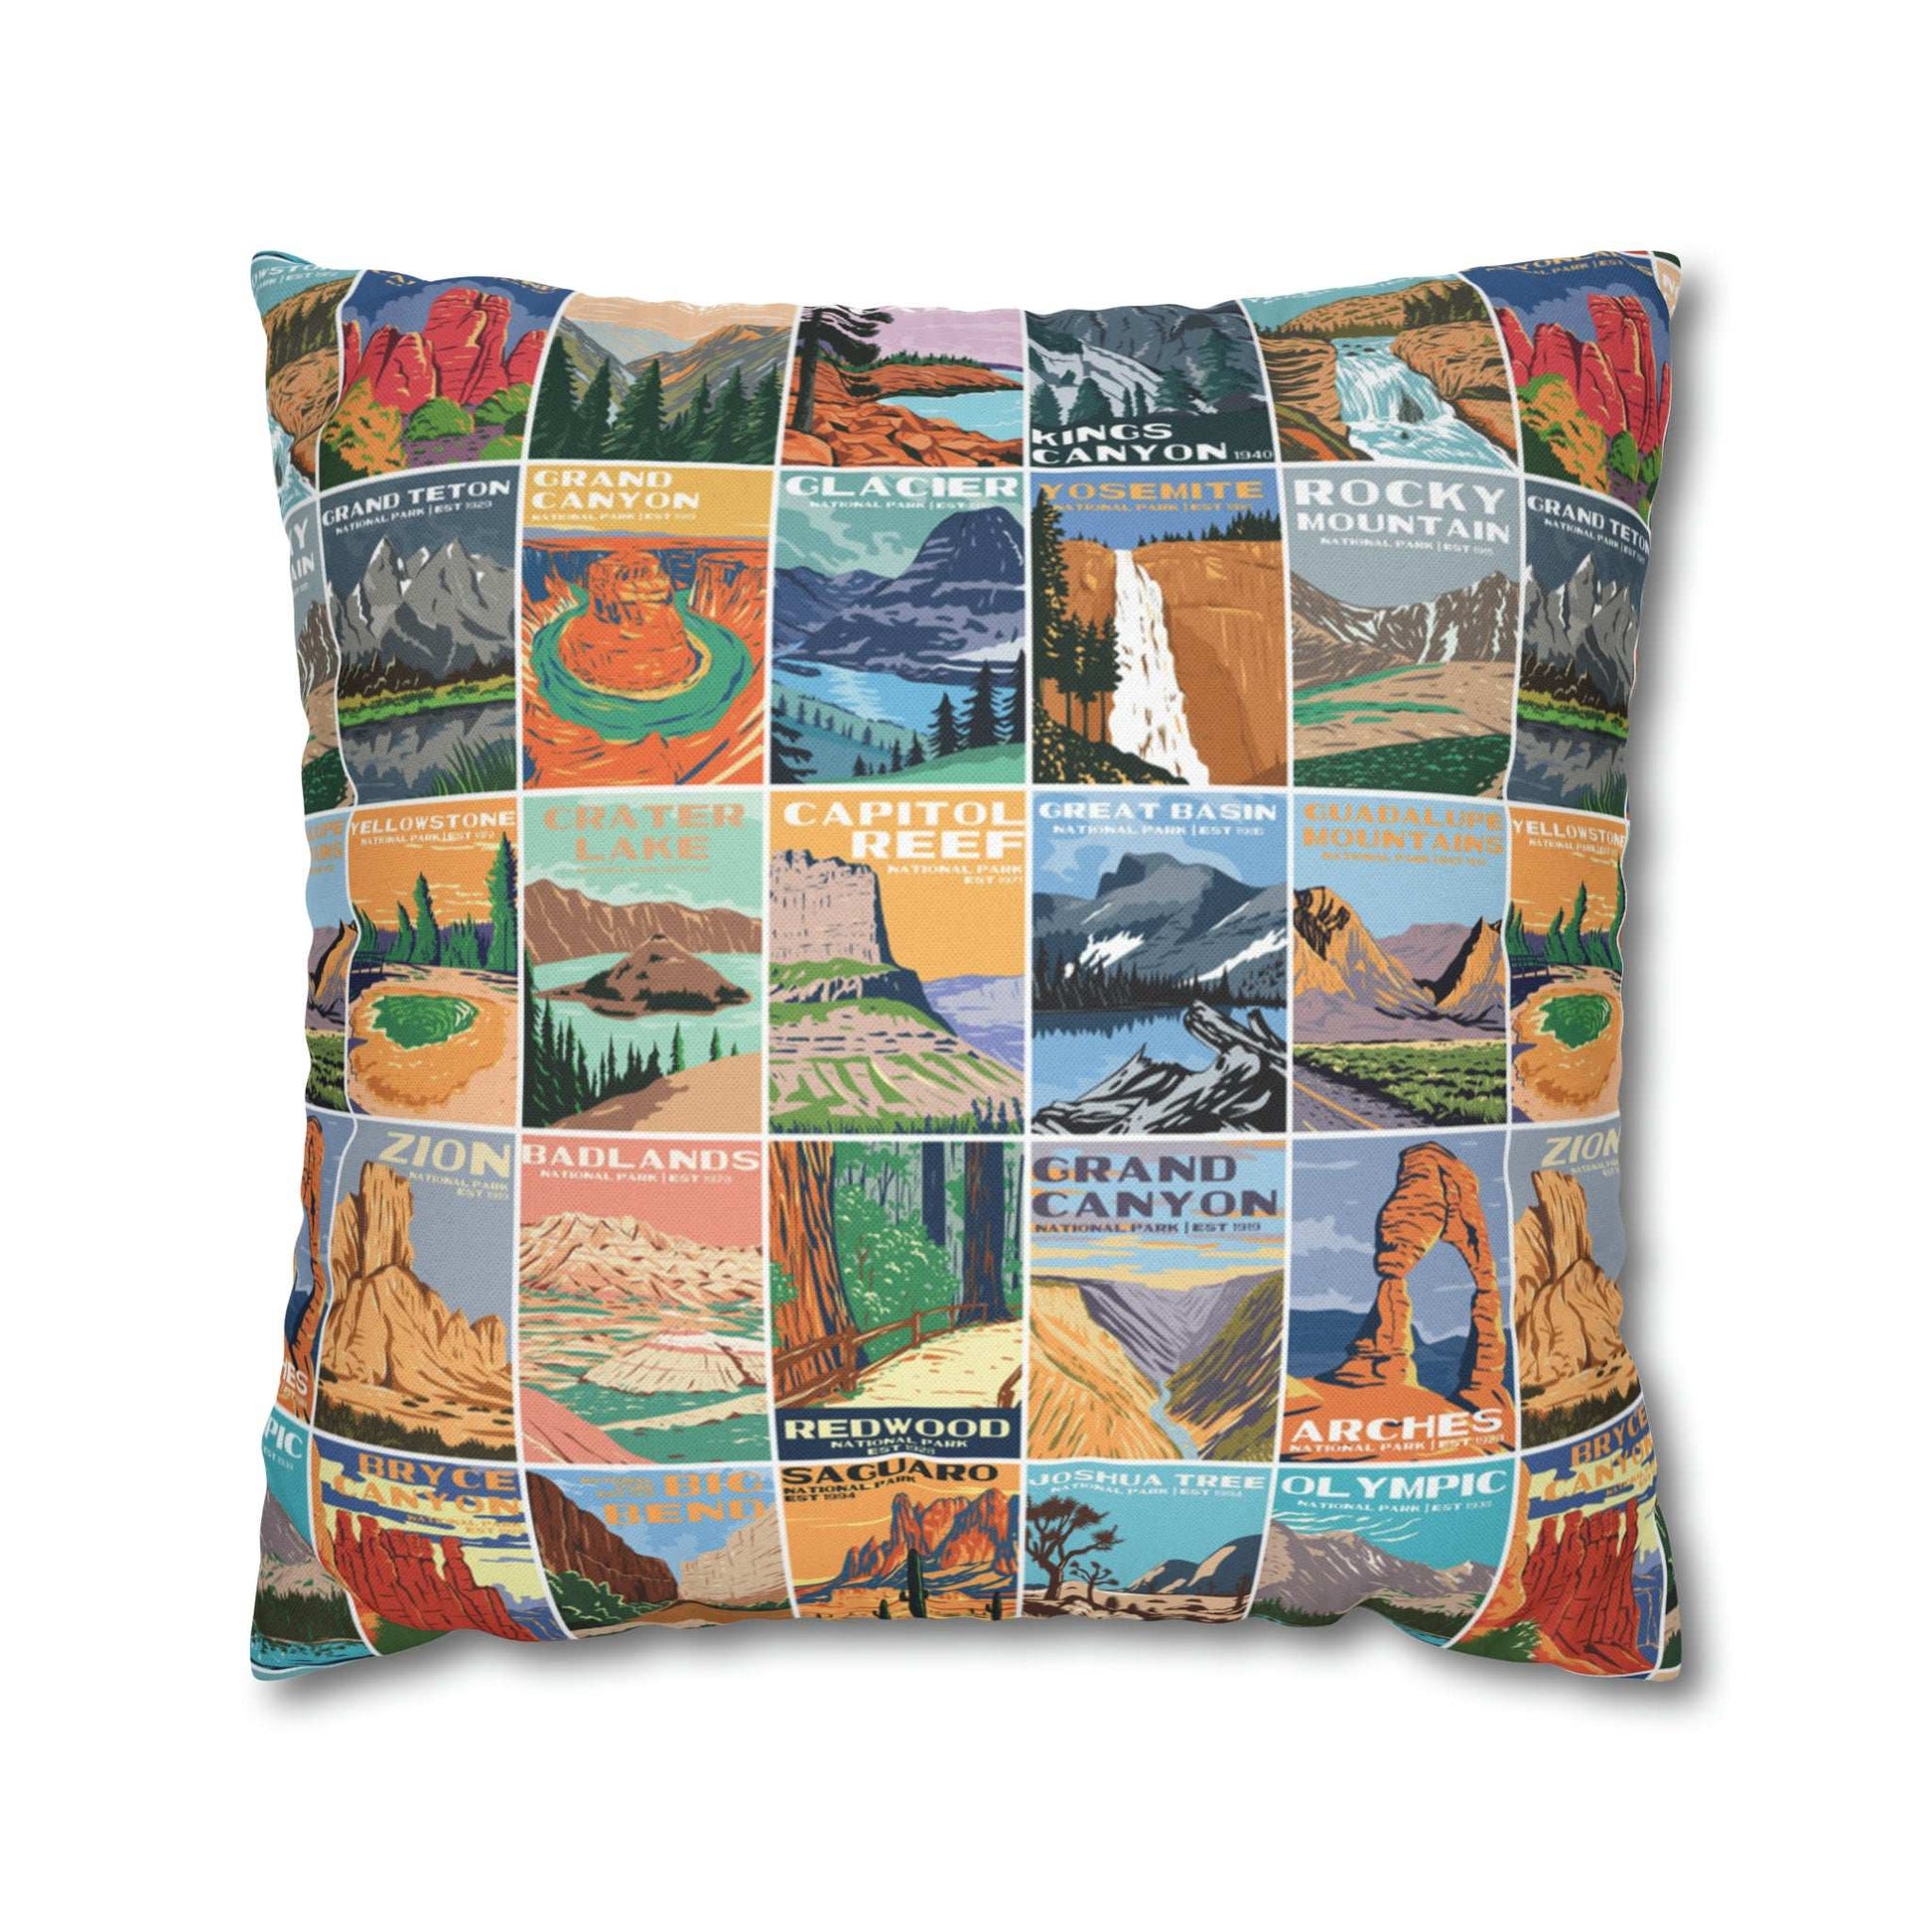 National Parks Square Pillow CasesCozy up and remember all your favorite memories from your National Park adventures with this vintage styled National Park pillow covers. Inspired by vintage advertis